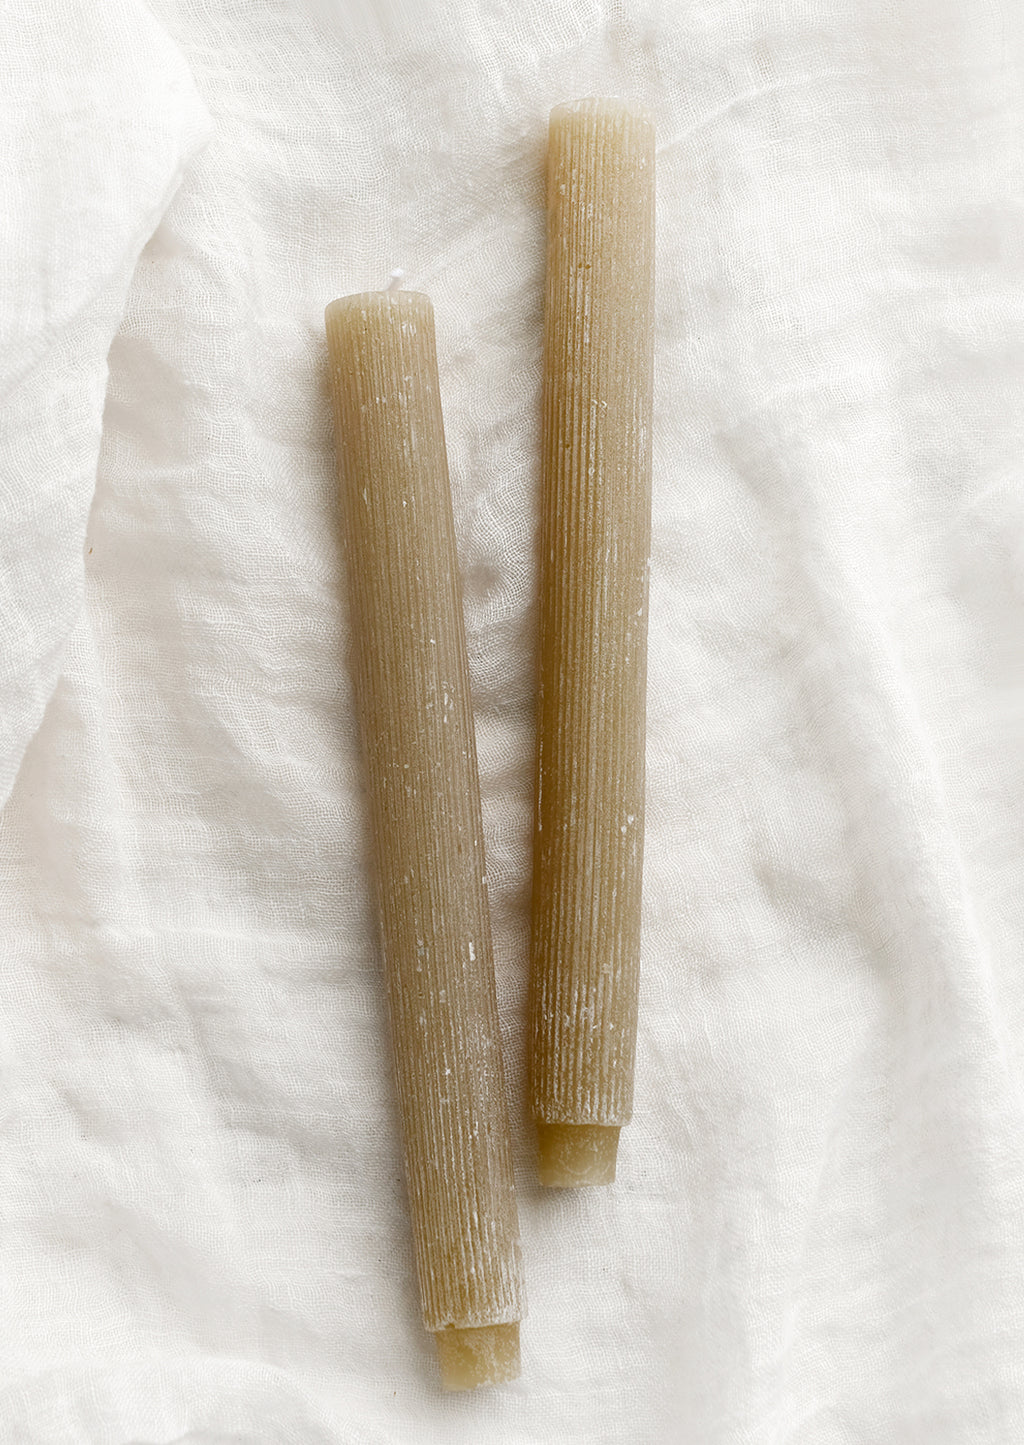 Linen: Taper candles with fine ribbed texture in linen tan.